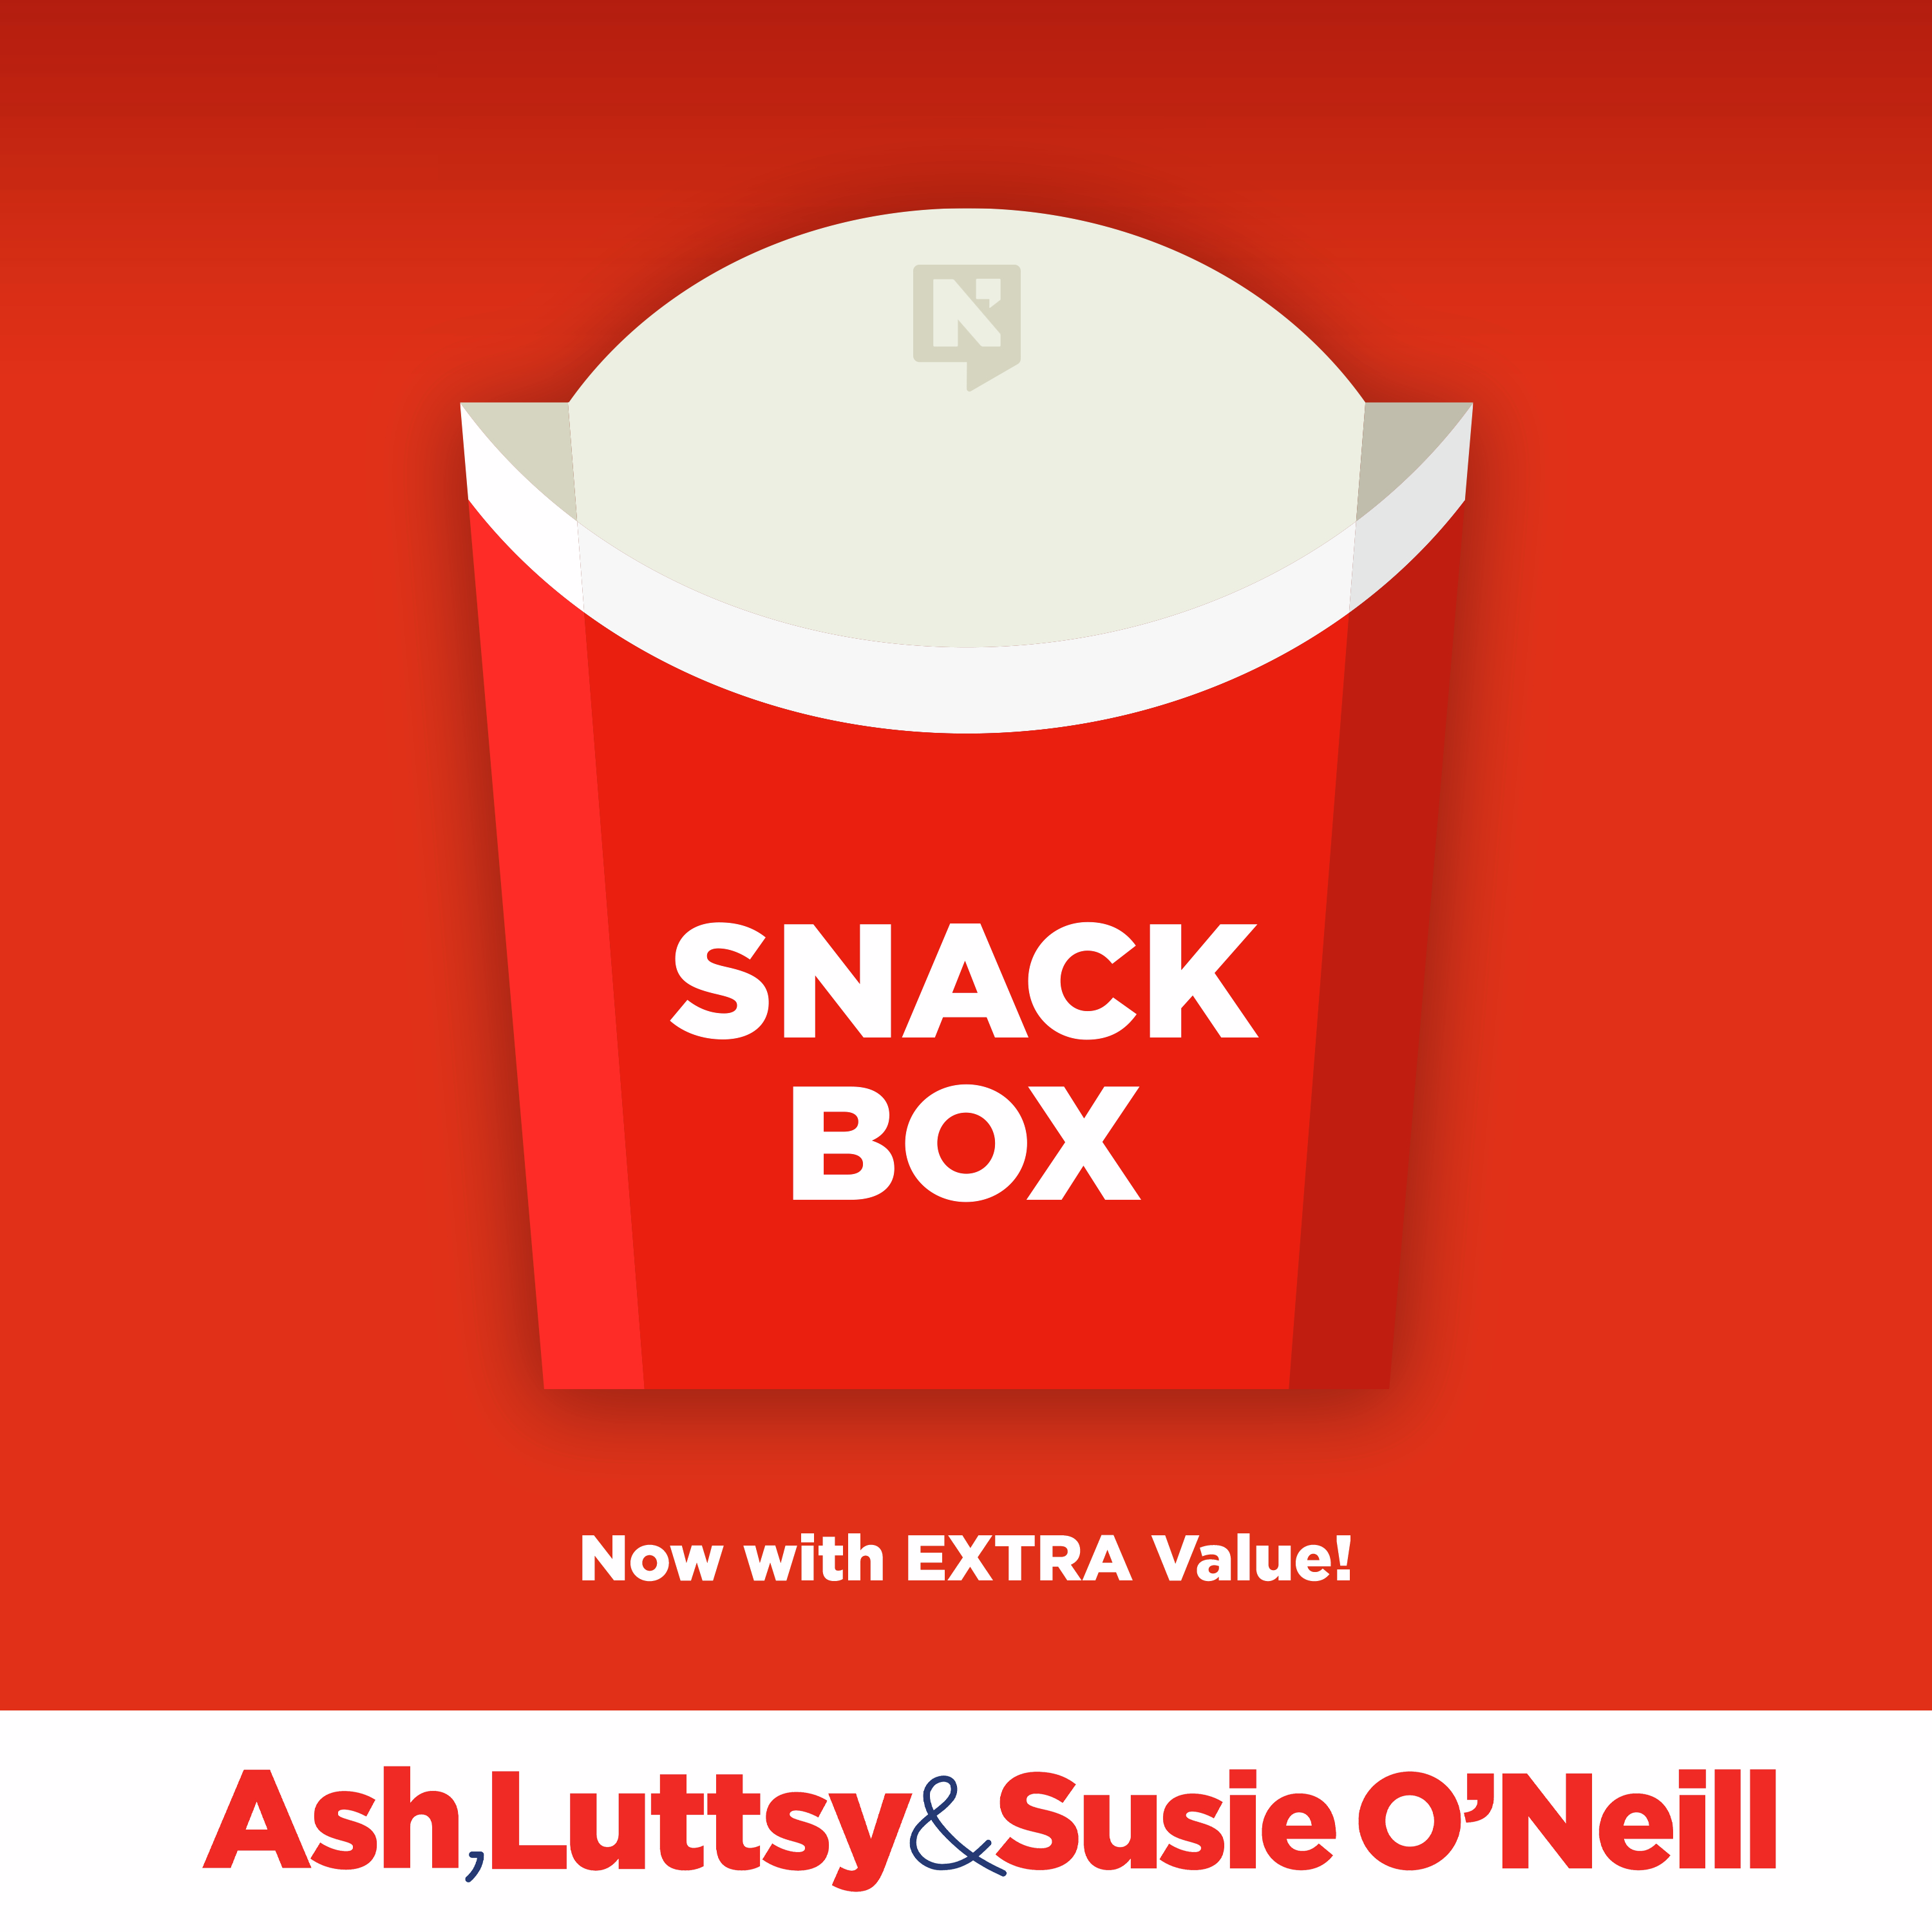 The Ash, Luttsy and Susie Snackbox | Monday 10th June